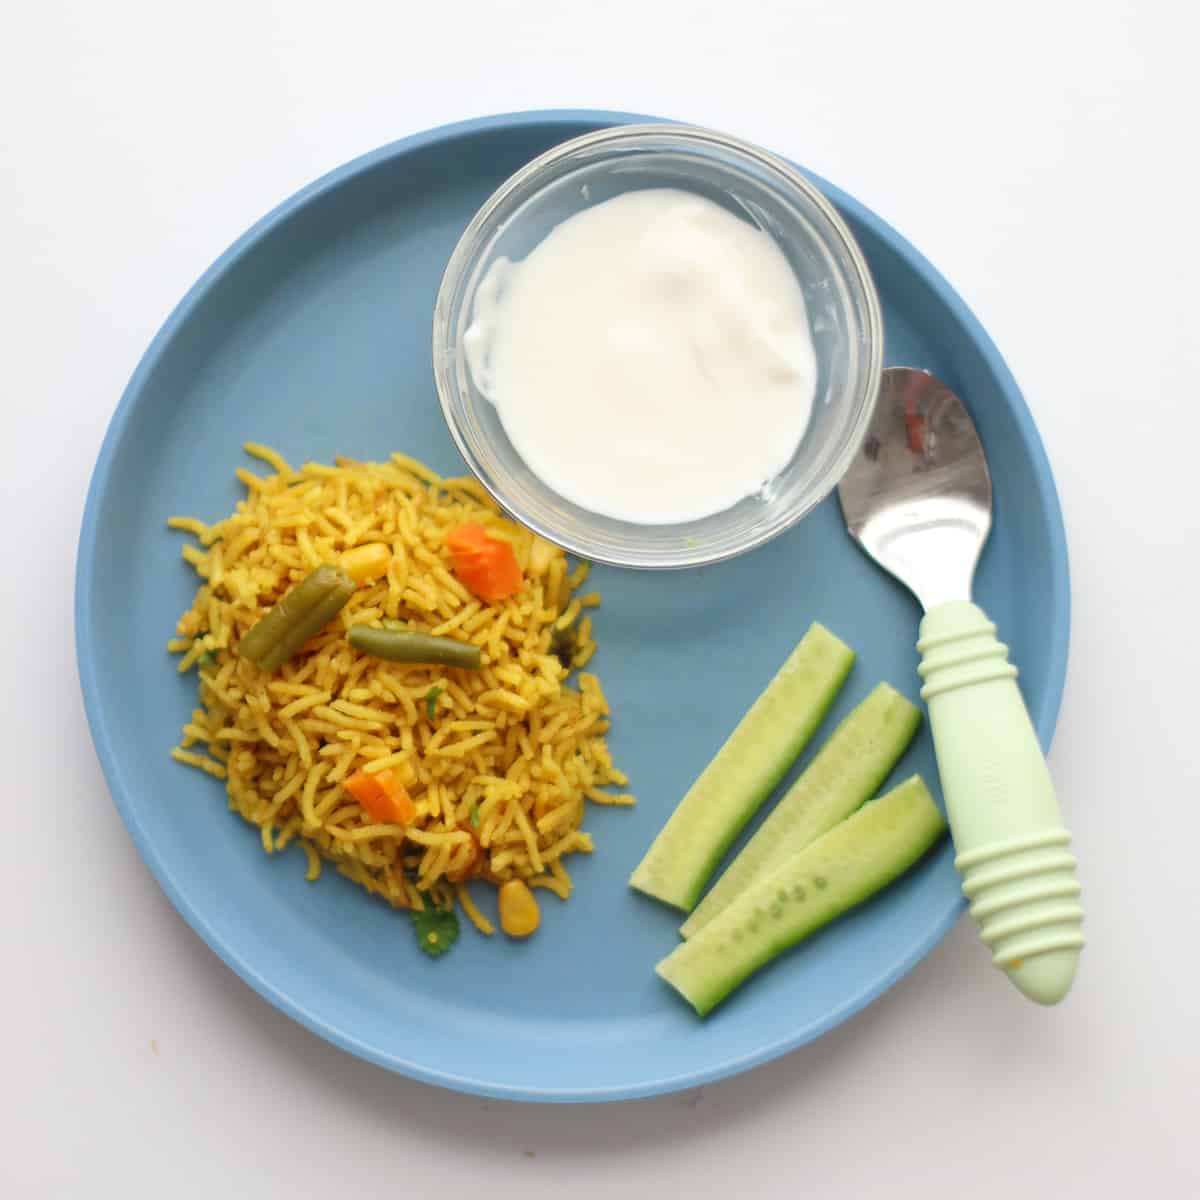 Toddler's plate with rice, yogurt, and cucumbers.